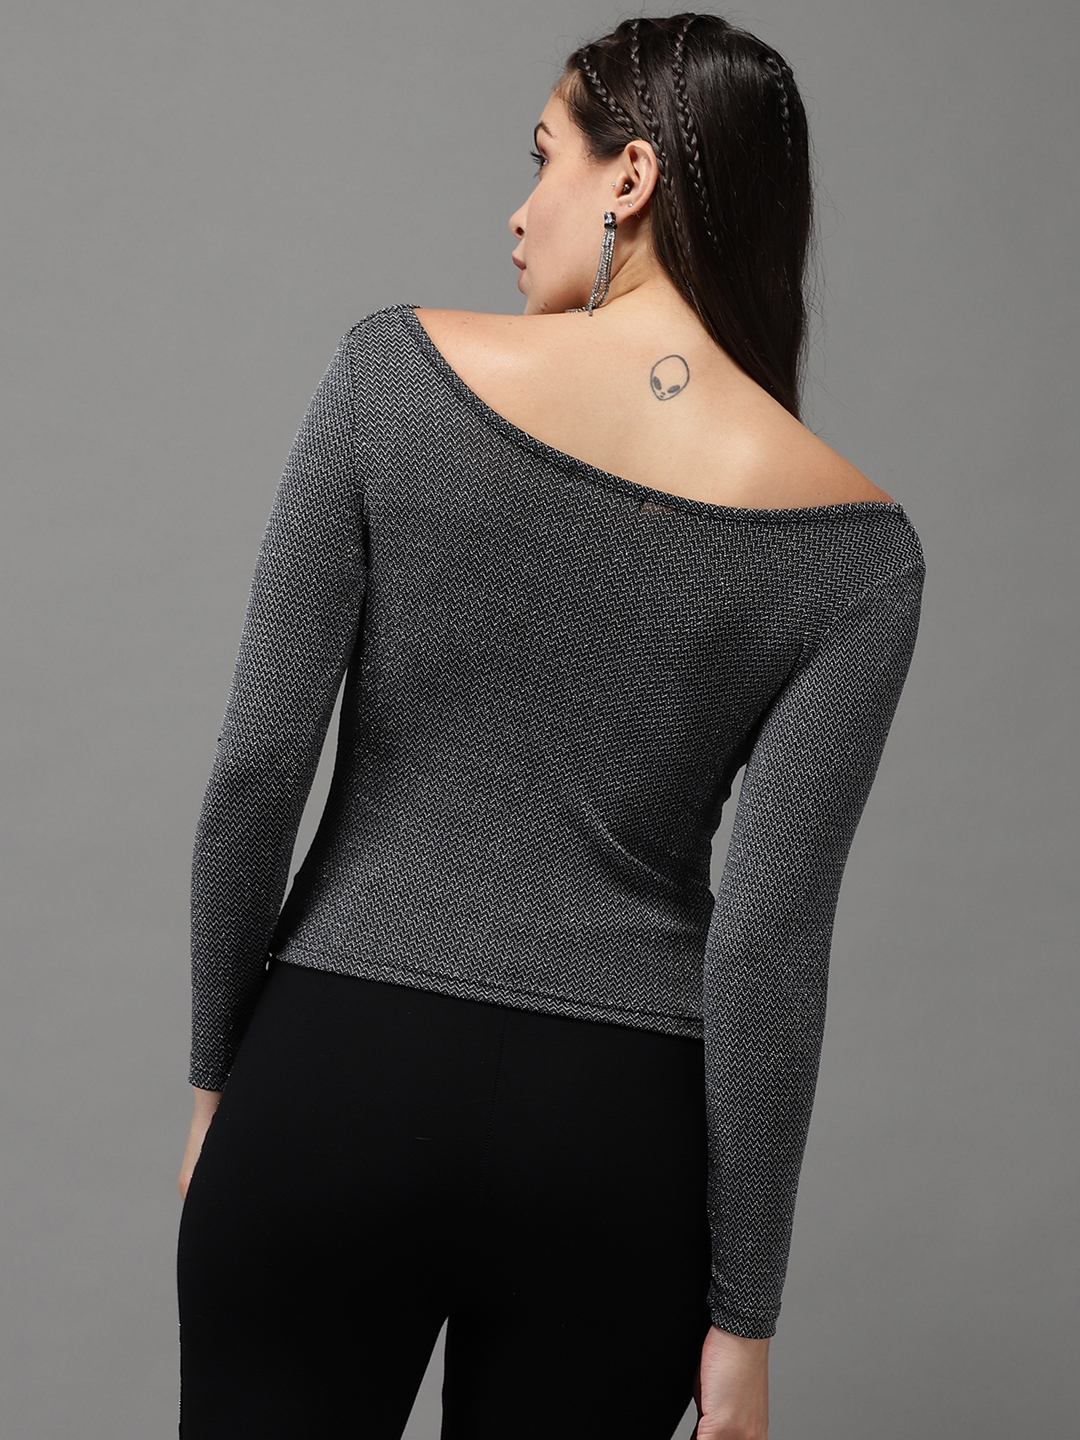 Women's Silver Polyester Solid Tops